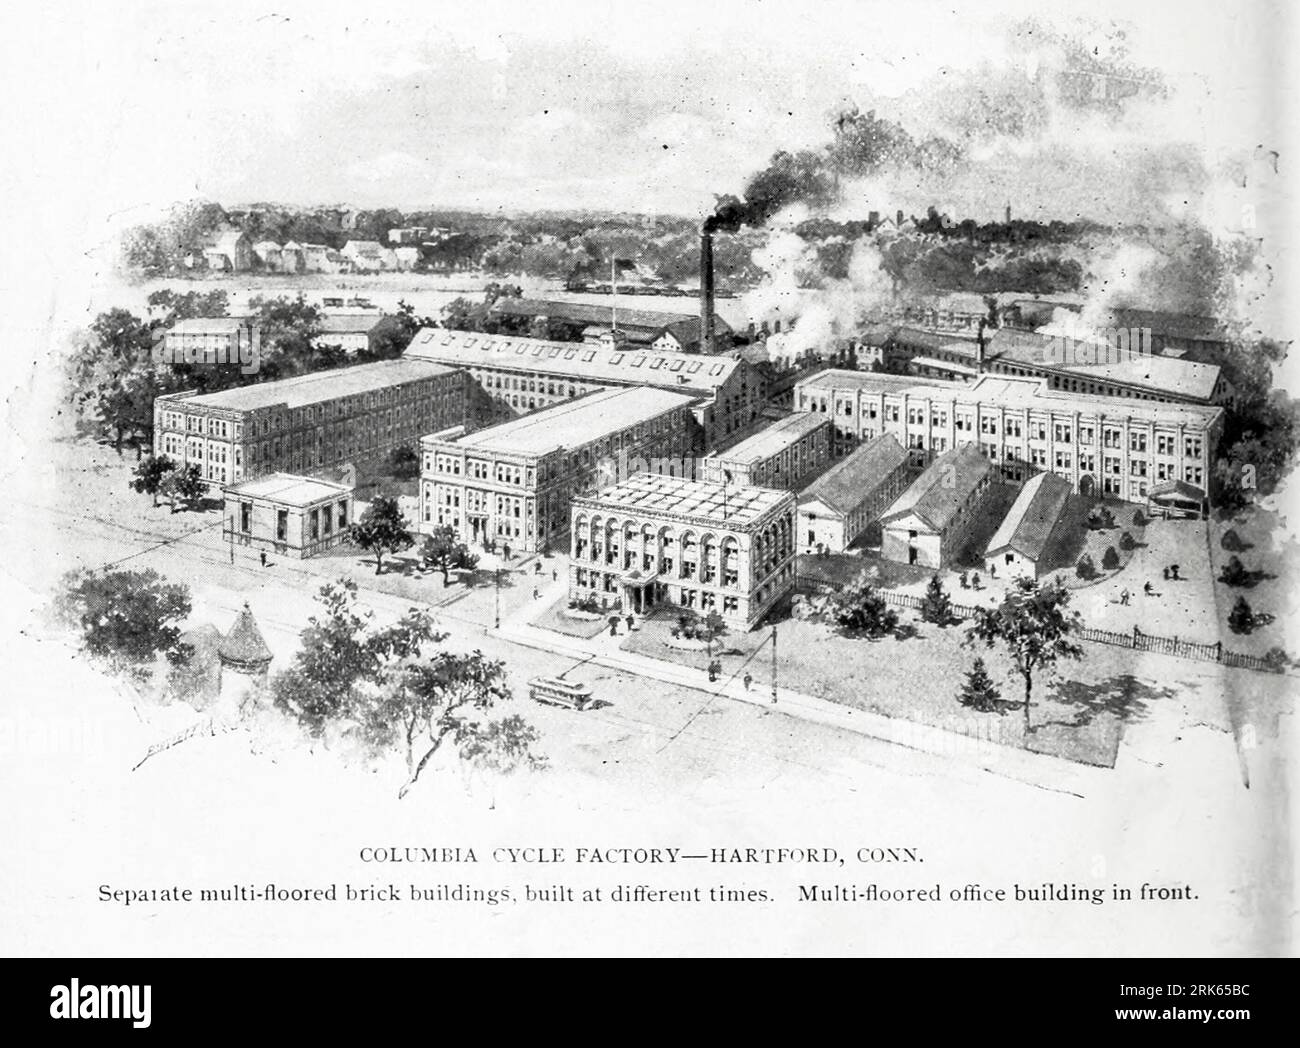 Columbia Cycle Factory HARTFORD, Connecticut Separate multi-floored brick Buildings from the Article MODERN MACHINE-SHOP ECONOMICS PRIME REQUISITES OF SHOP CONSTRUCTION By Horace L. Arnold from The Engineering Magazine DEVOTED TO INDUSTRIAL PROGRESS Volume XI October 1896 NEW YORK The Engineering Magazine Co Stock Photo